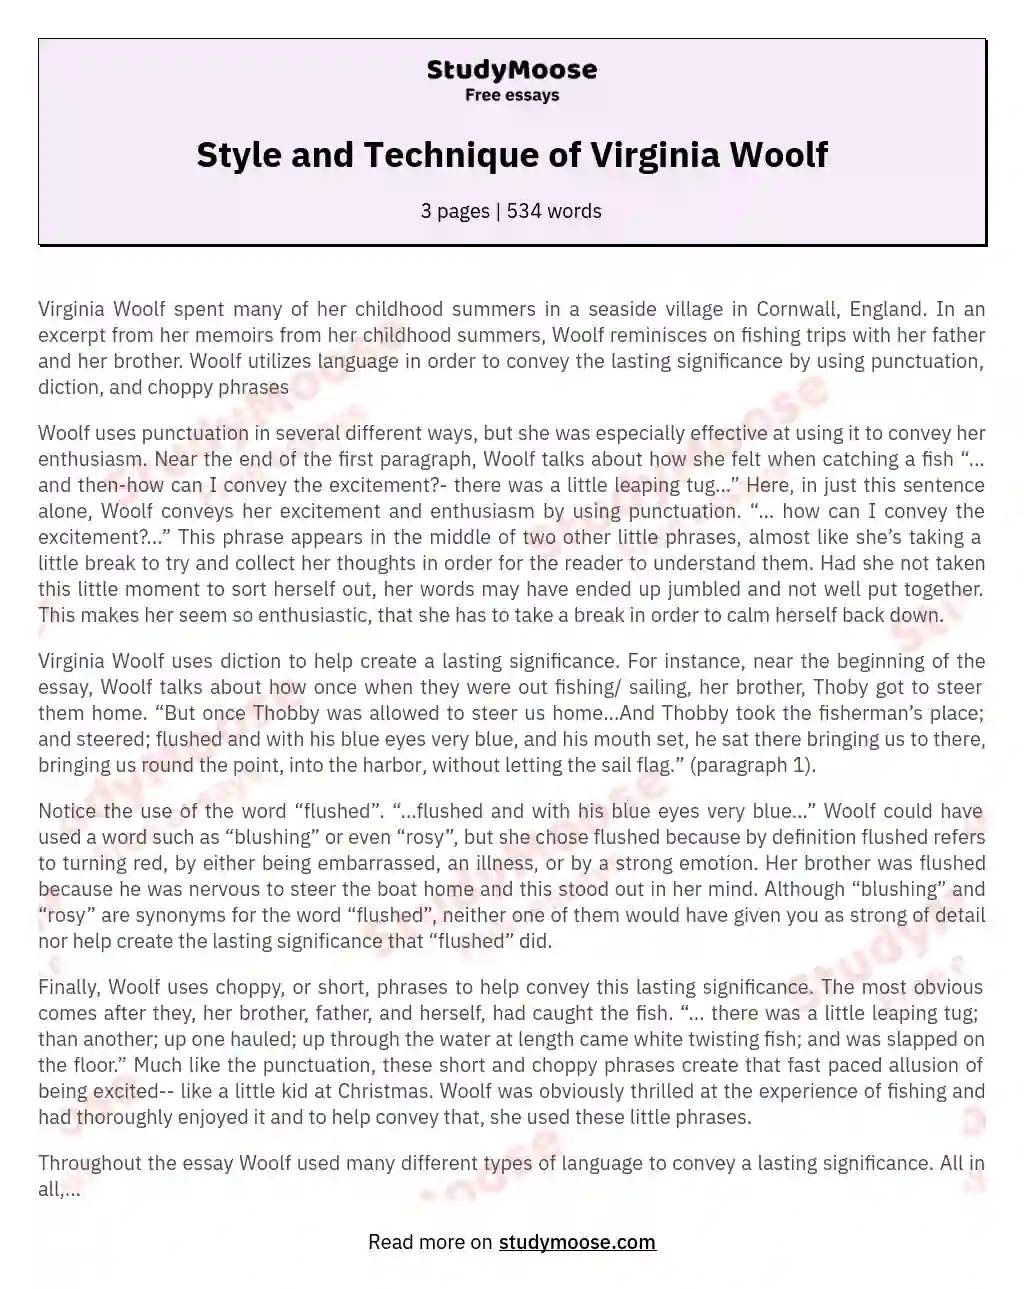 Style and Technique of Virginia Woolf